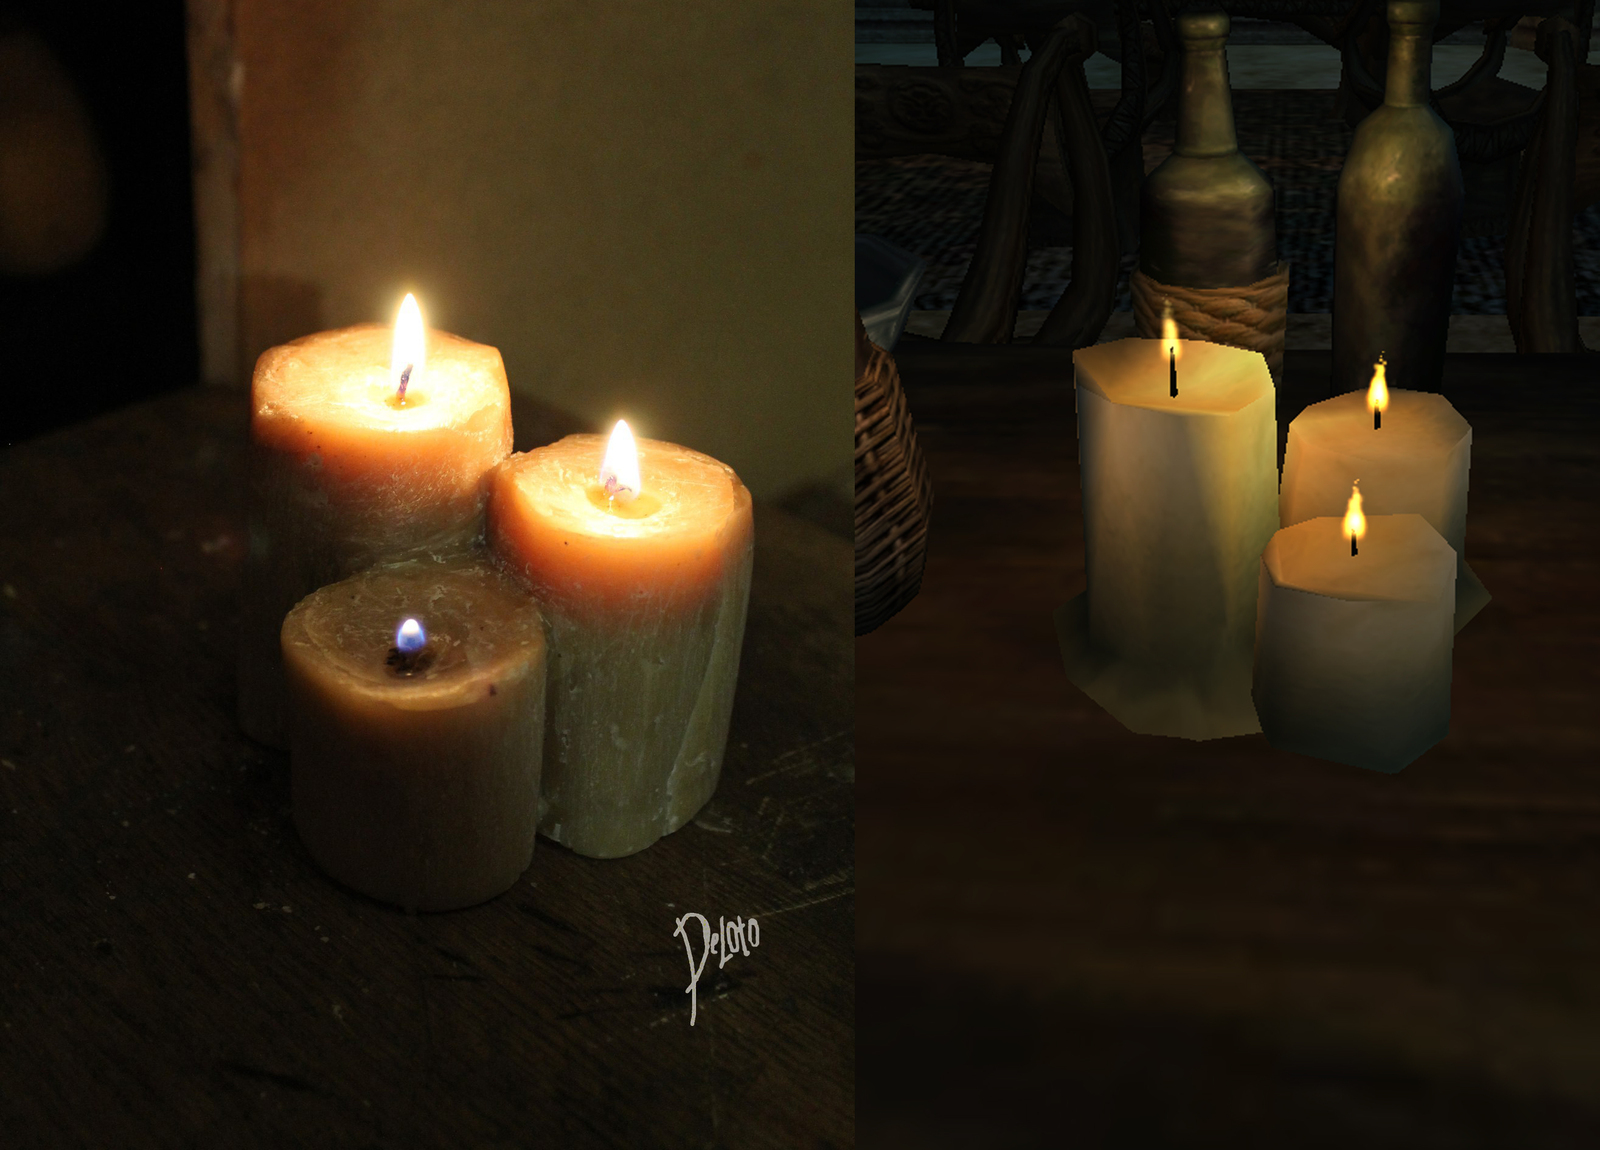 Candles from the game TES III: Morrowind - My, The elder scrolls, , , Morrowind, , Deloto, Longpost, The Elder Scrolls III: Morrowind